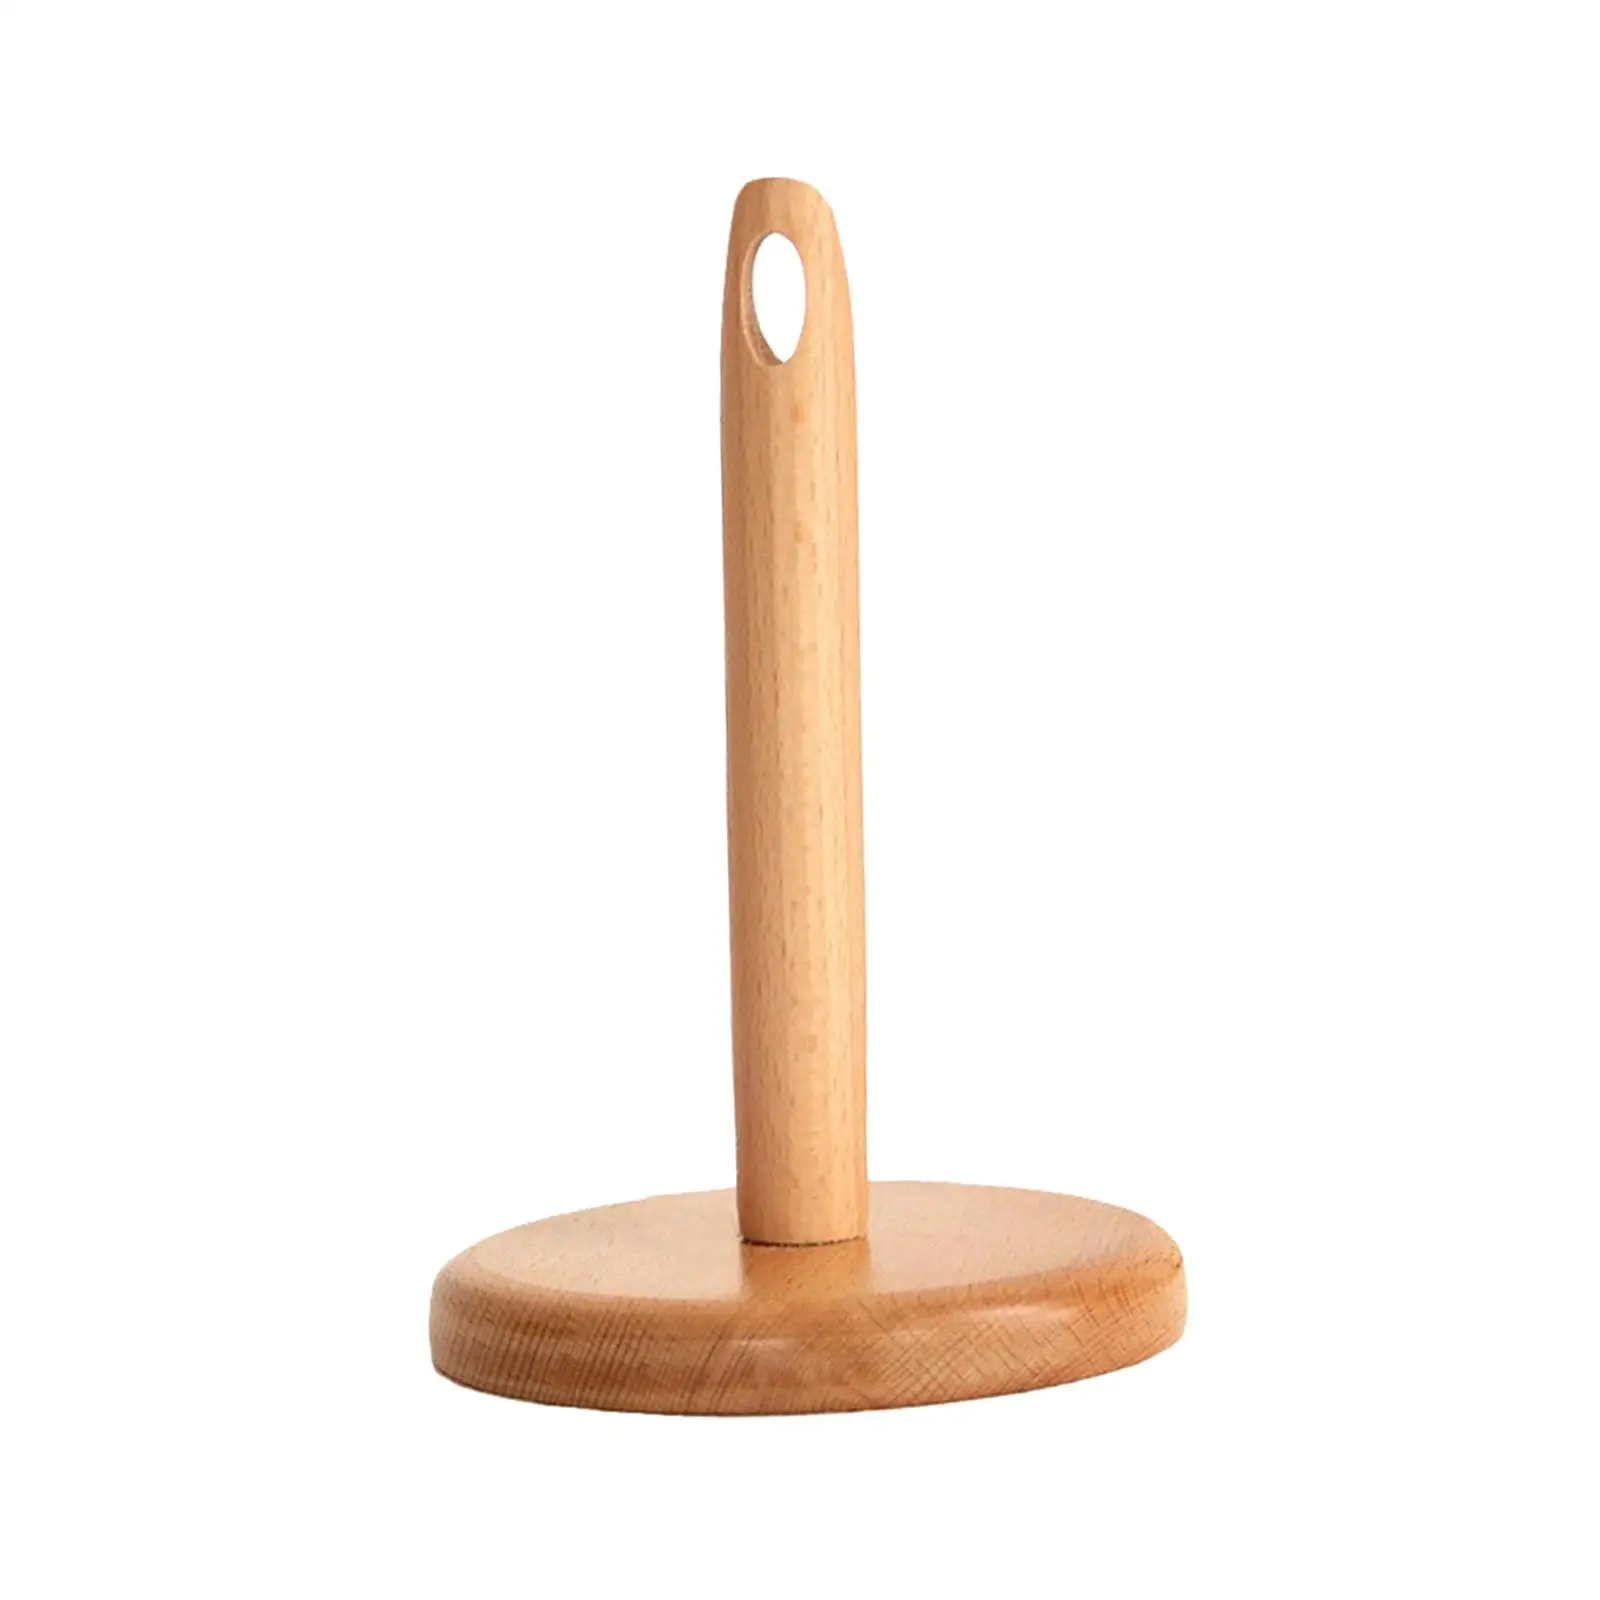 Yarn Holder Wooden Stand Paper Roll Holder Revolving Spindle Sewing Tool Wool Holder for Knitting Household Craft Home Accessory